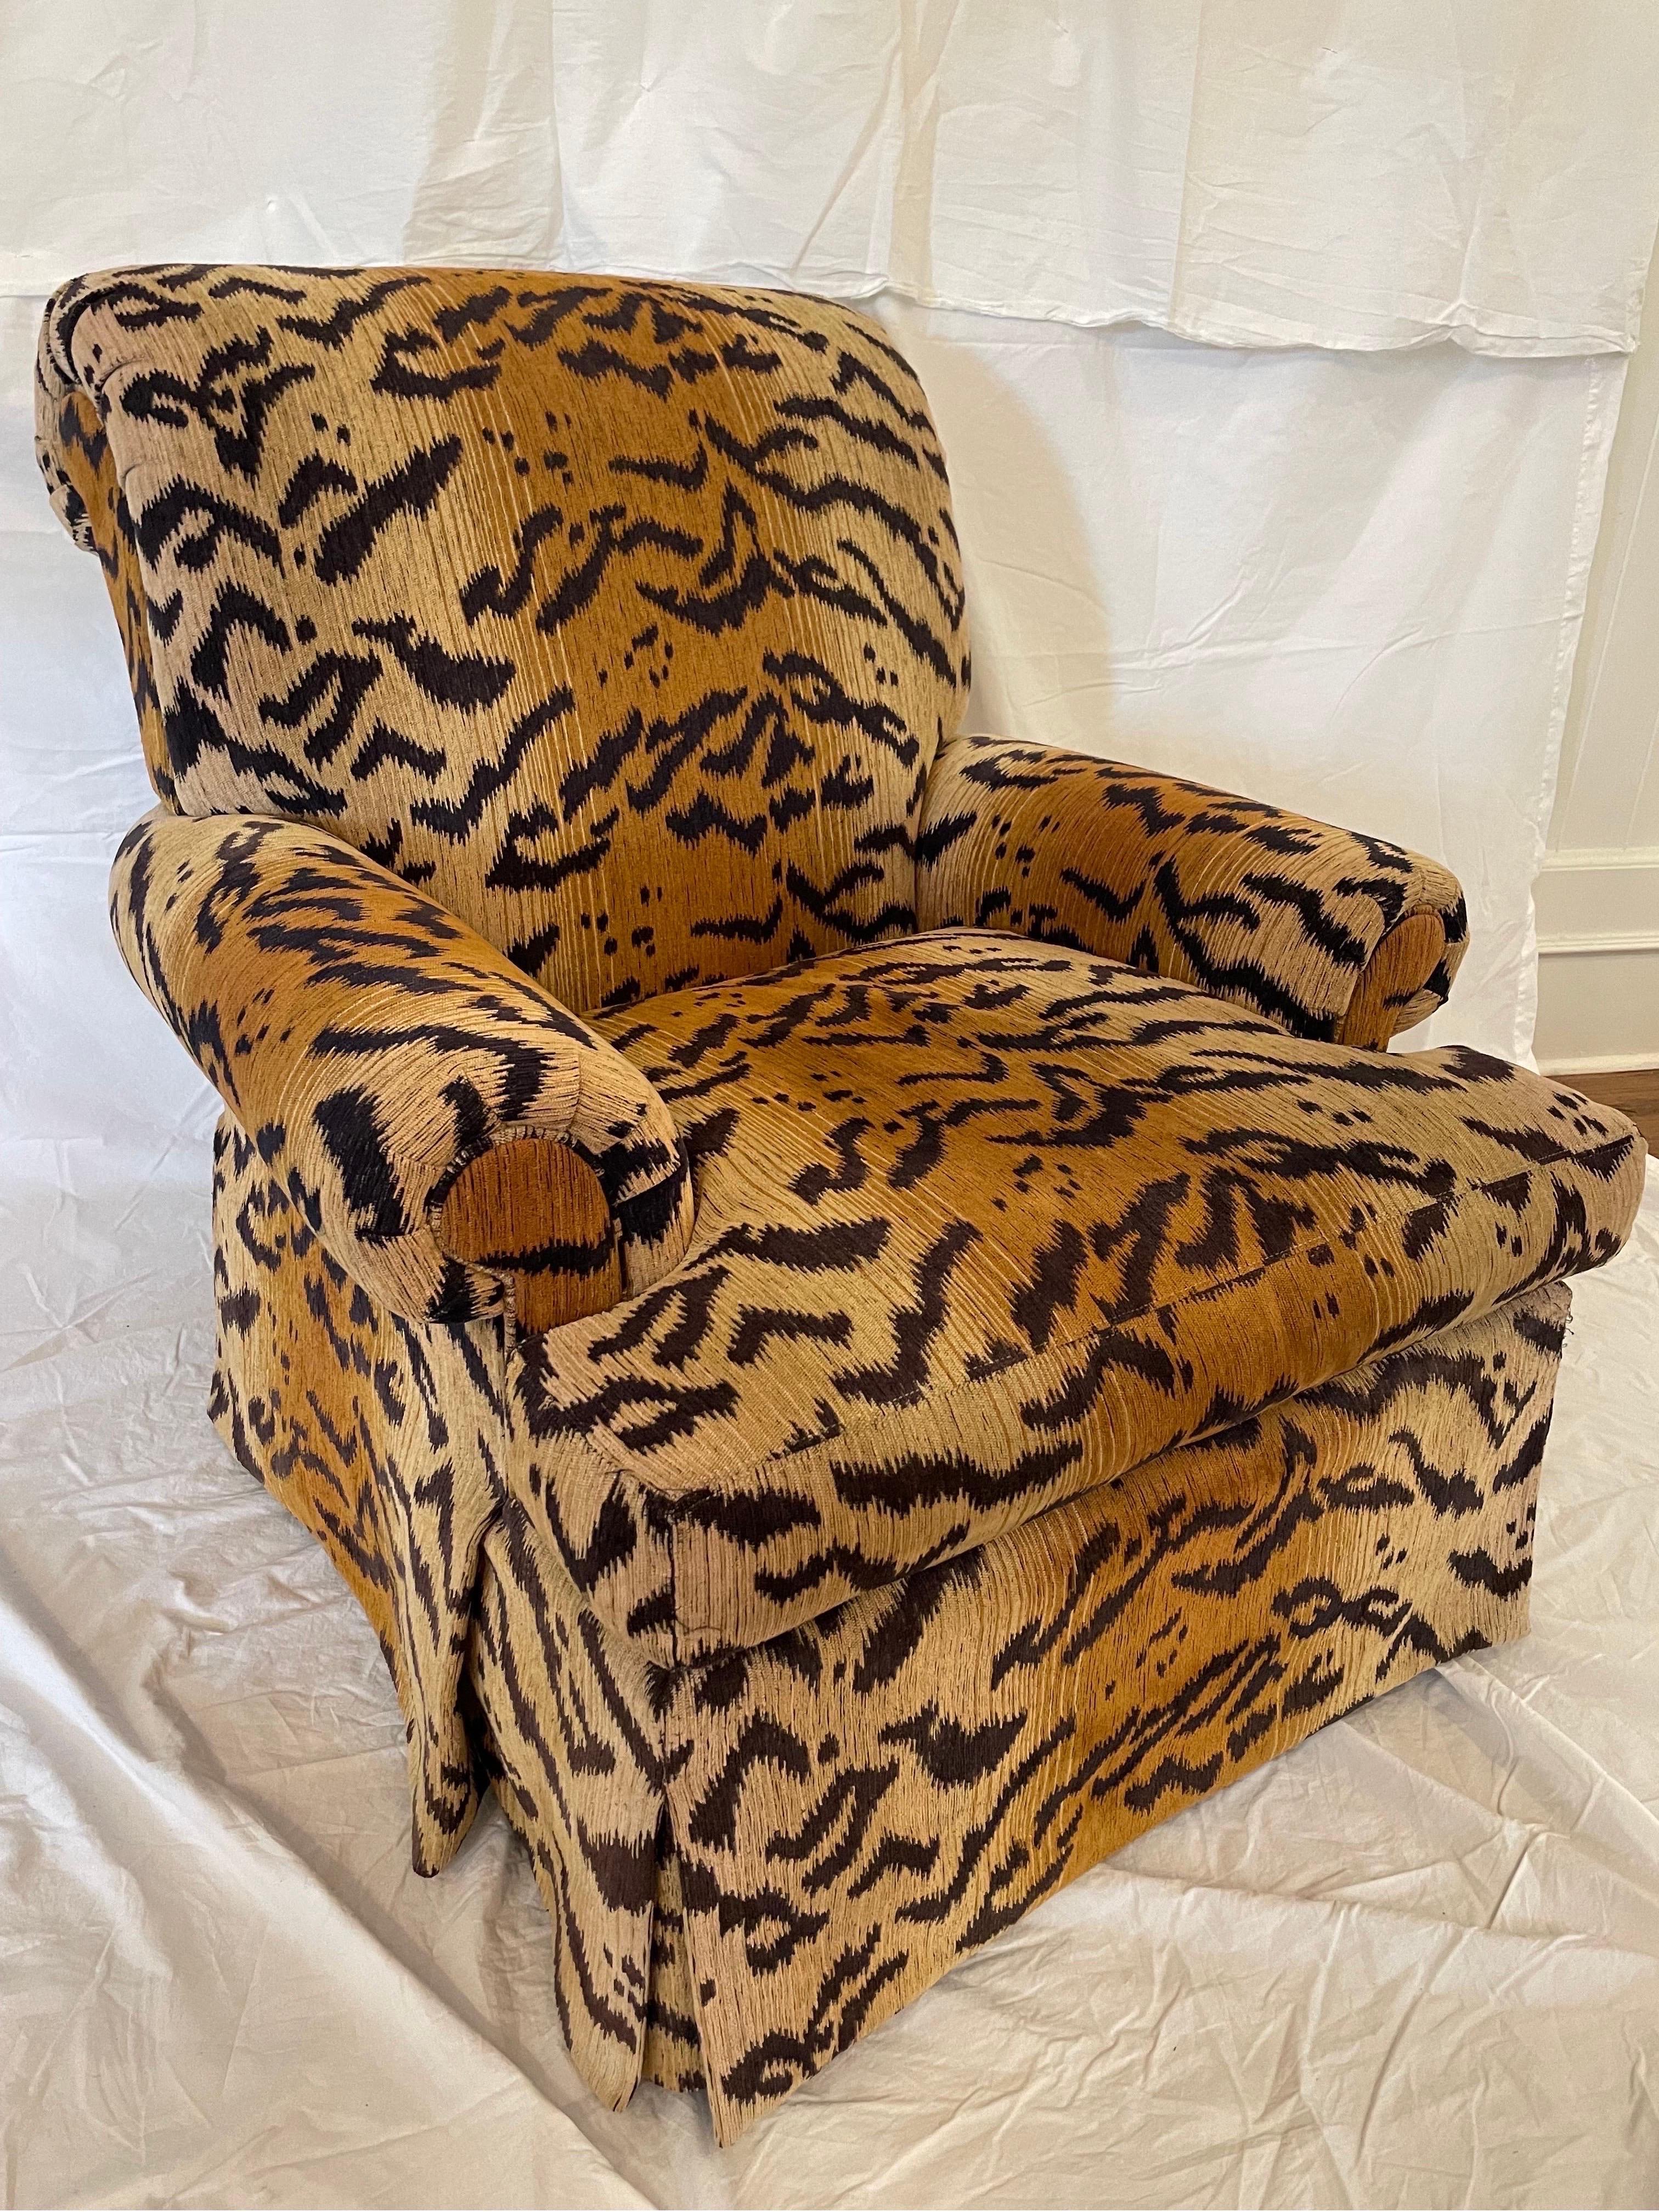 Stunning High Quality Vanguard Furniture club chair made in Hickory North Carolina. Very comfortable and Stylish with rolled arms & pleated skirt in a beautiful Scalamandre 